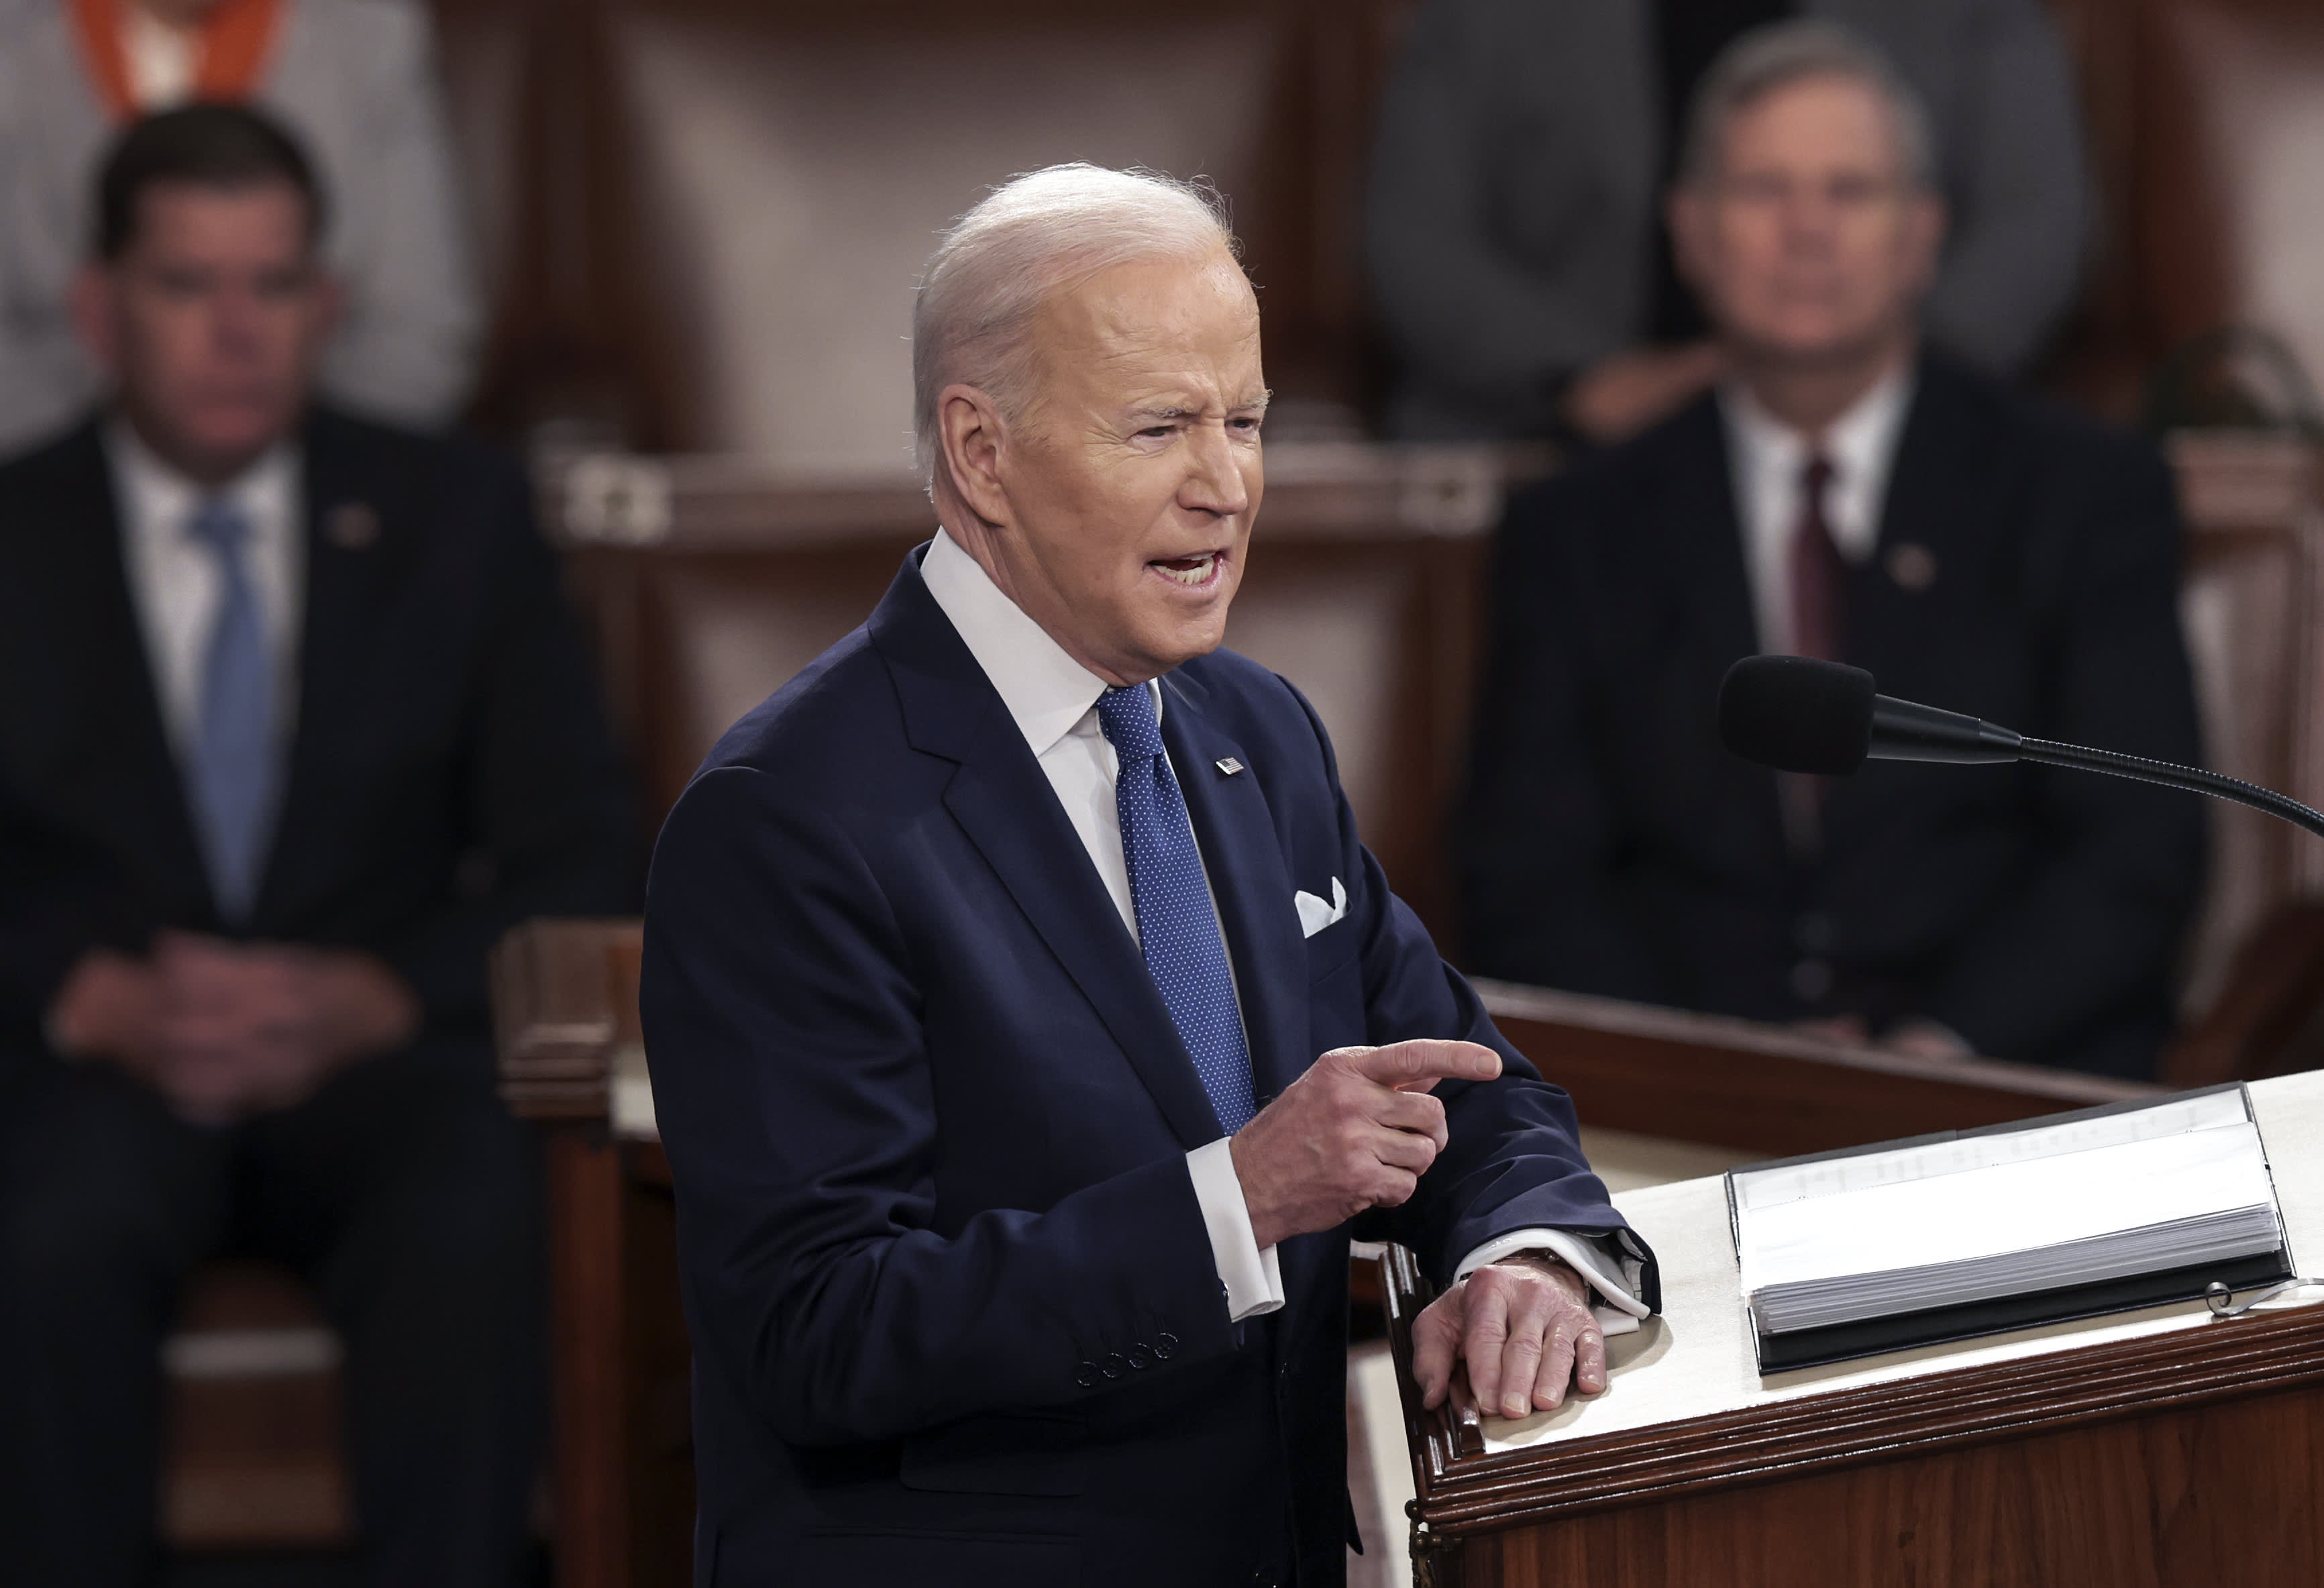 Biden says U.S. will deploy new Covid vaccines within 100 days if another variant emerges